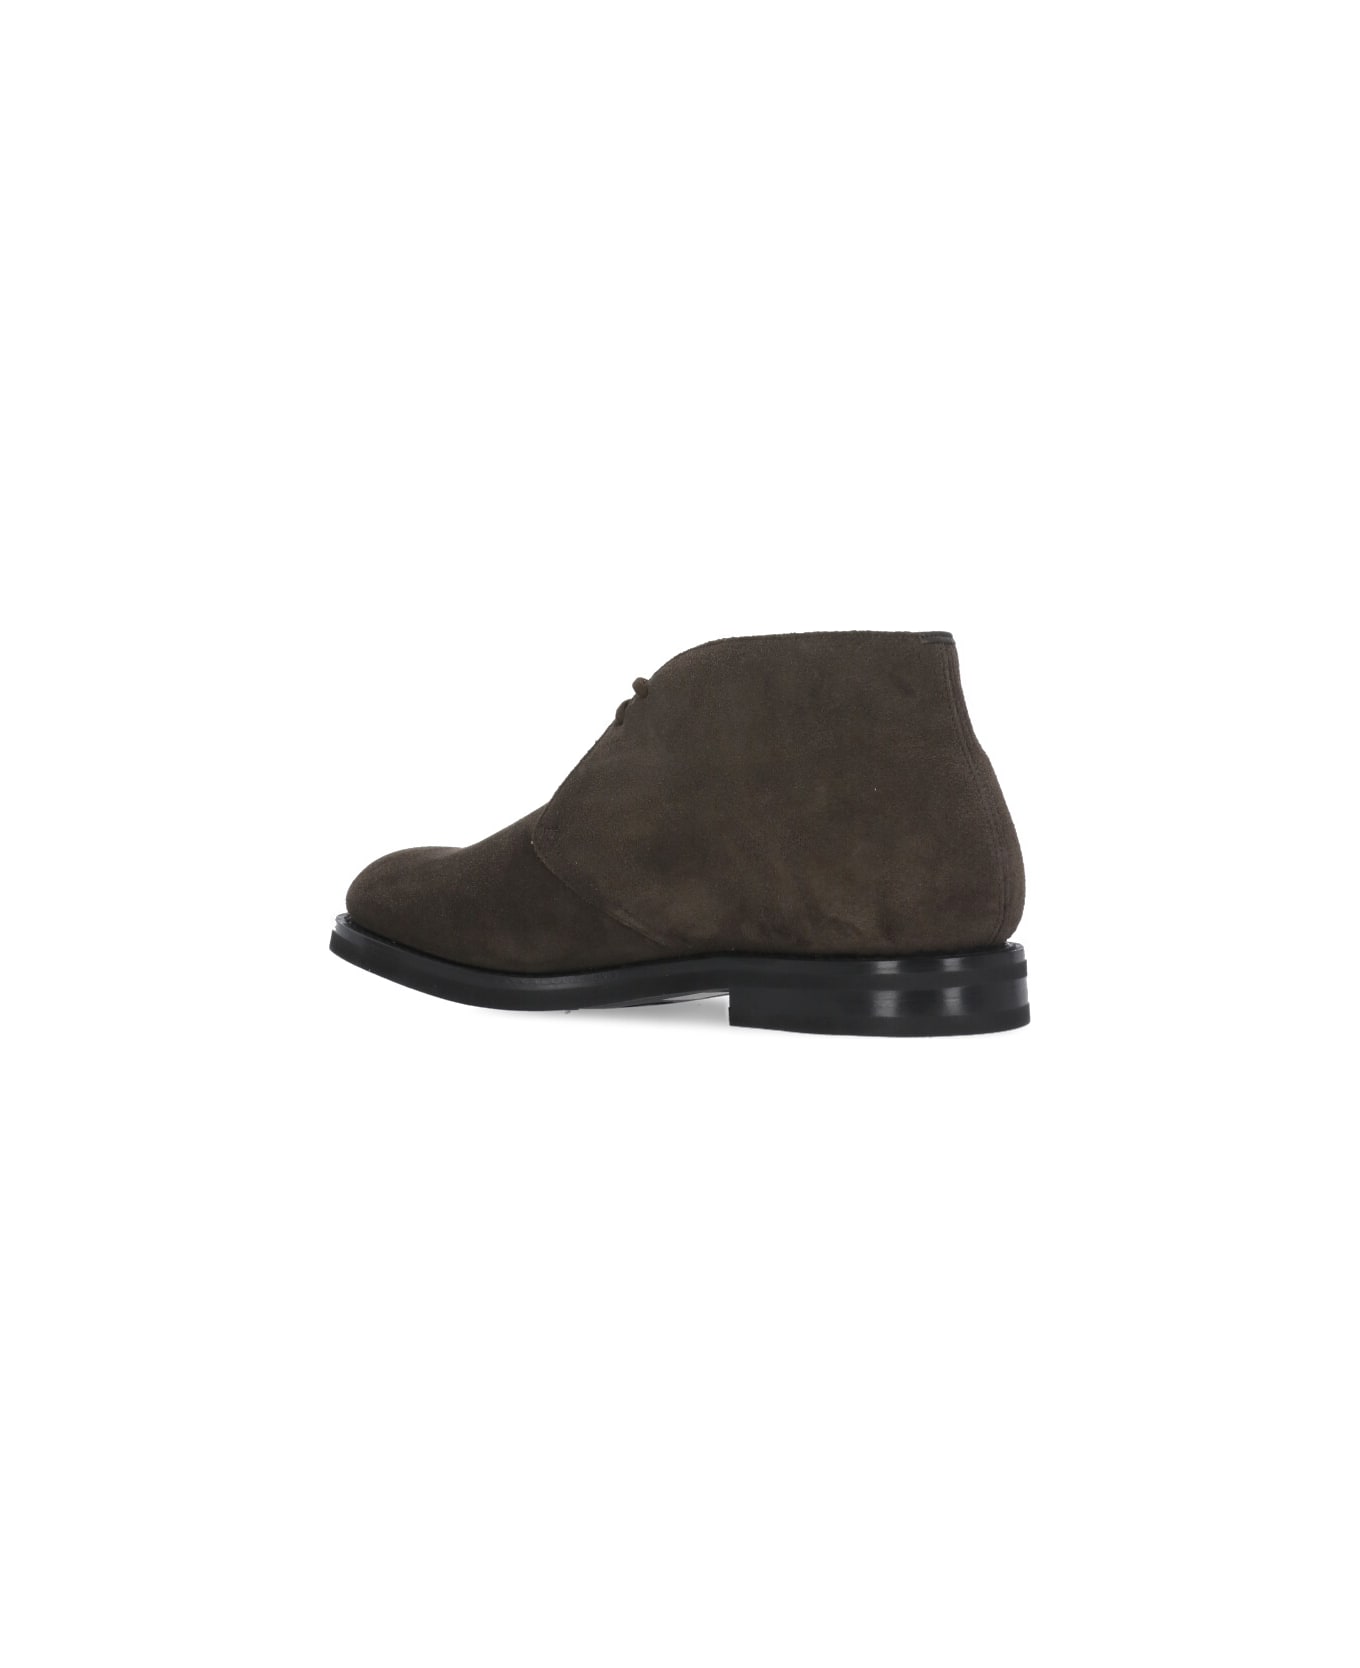 Church's Ryder - Suede Leather Ankle Boot - Brown